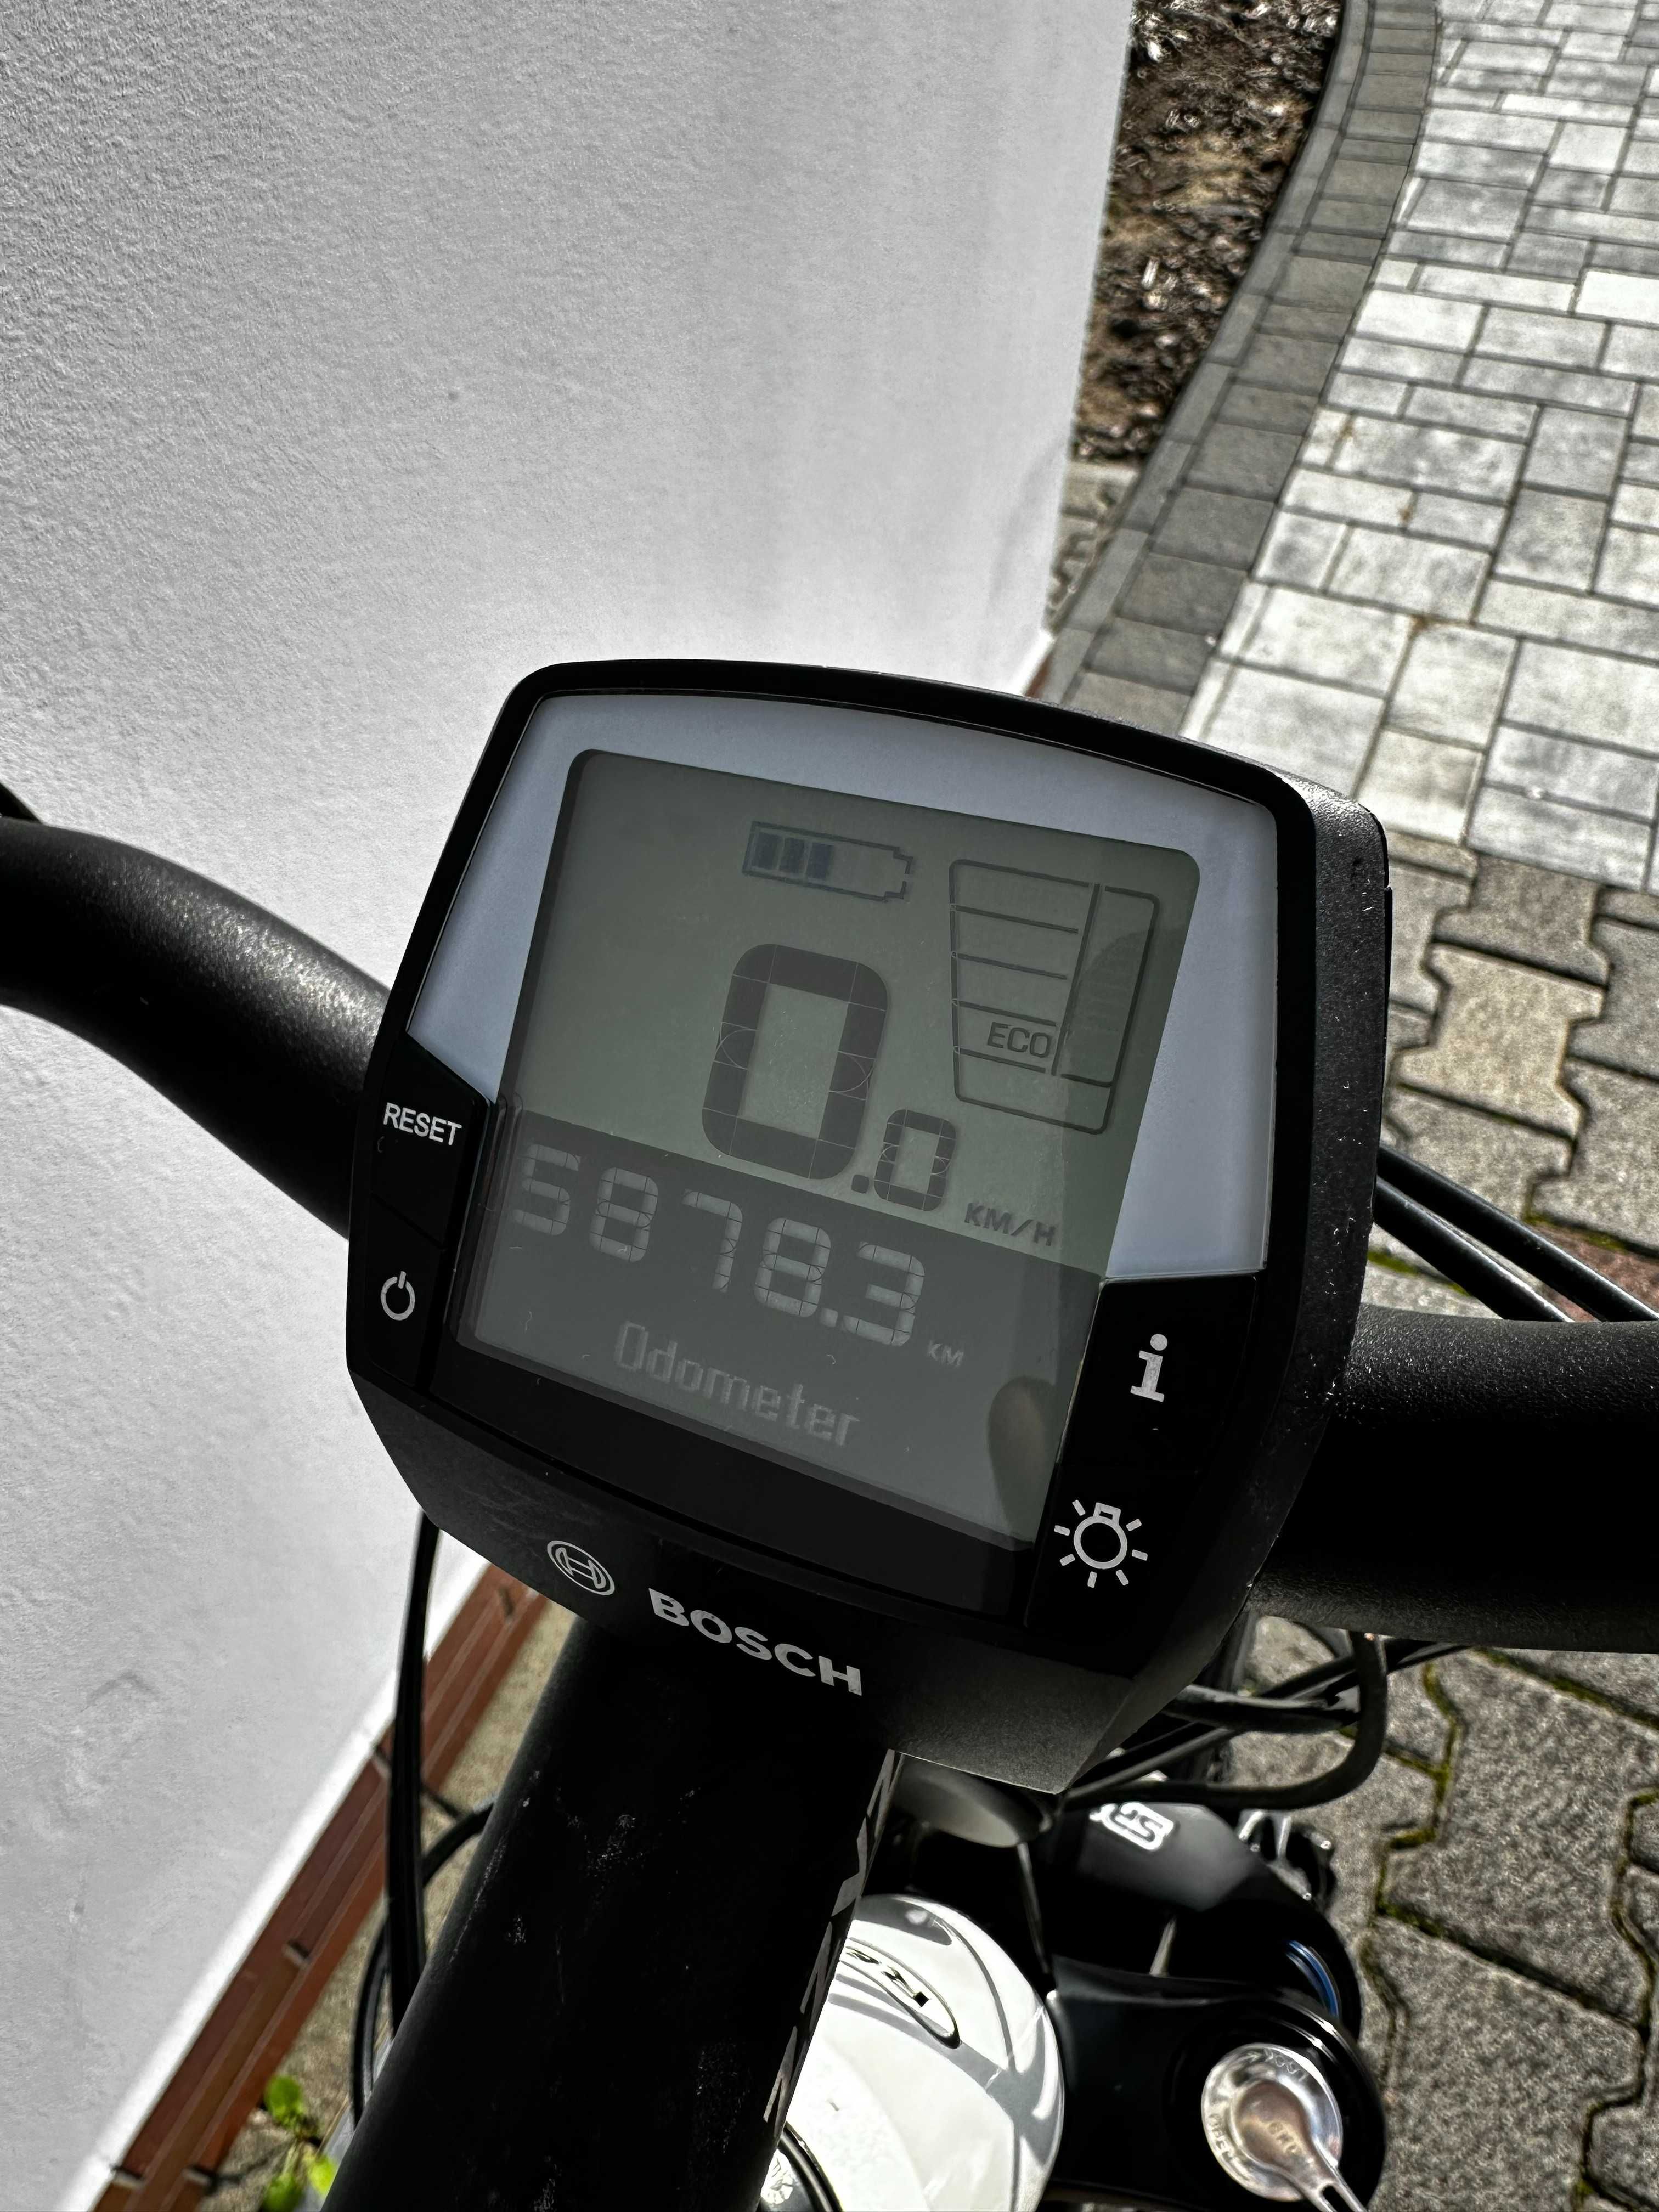 Rower elektryczny e-Bike Riese & Müller New Charger